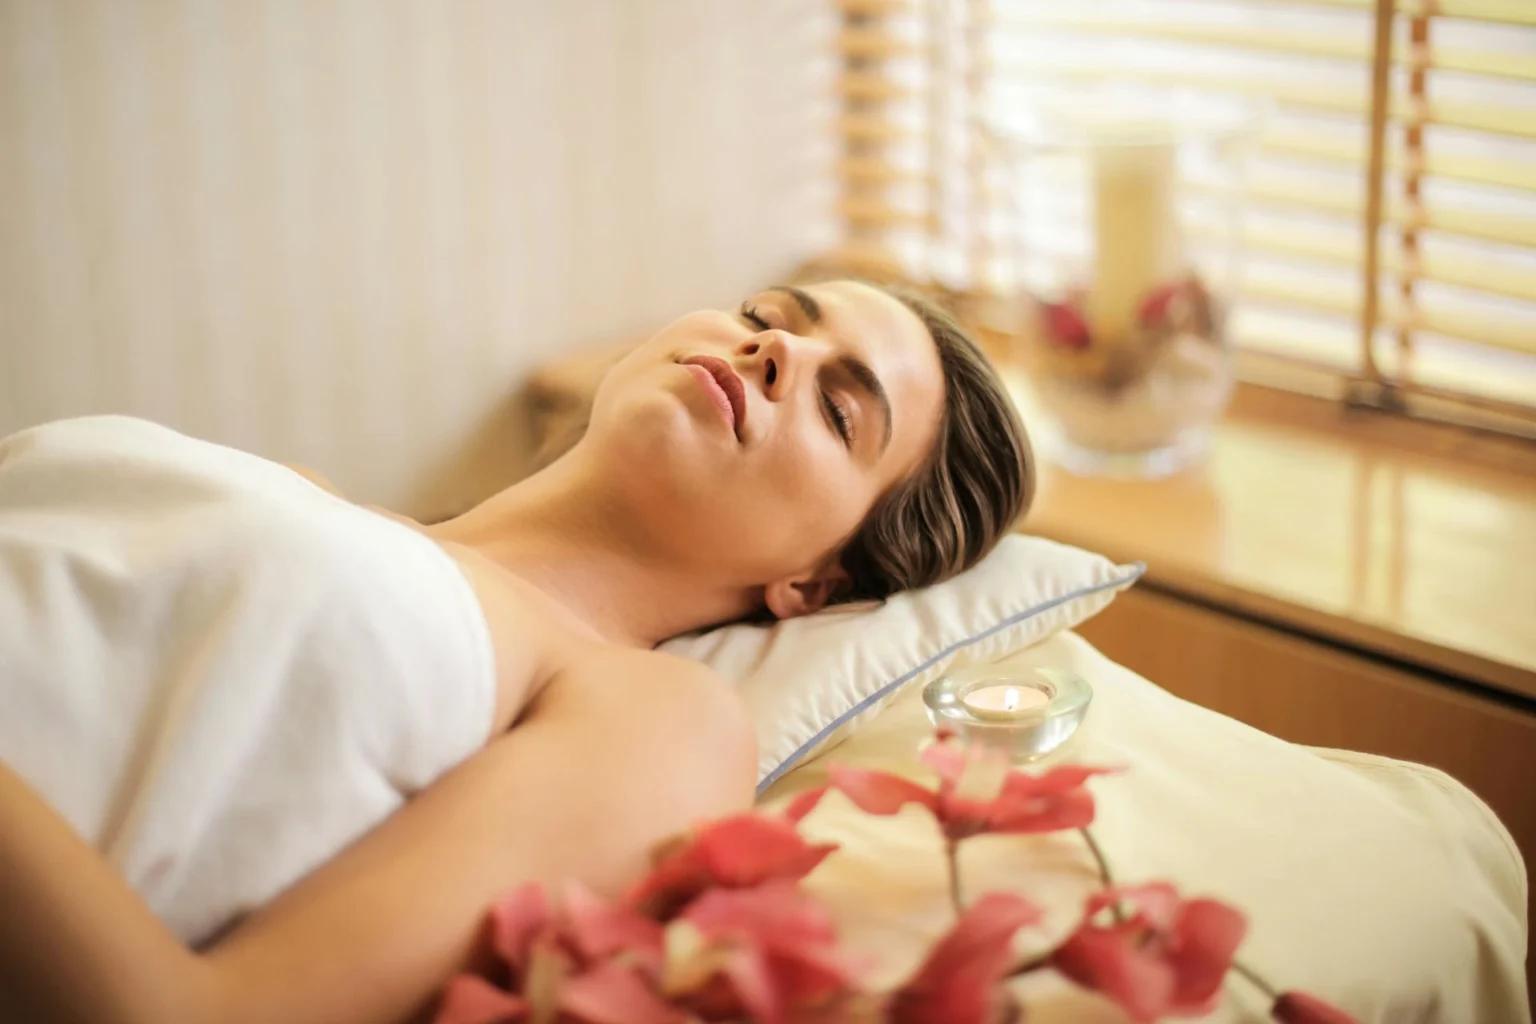 In the picture there is a girl covered with a towel relaxing on a massages bed. Next to her, a light candle and some flowers.